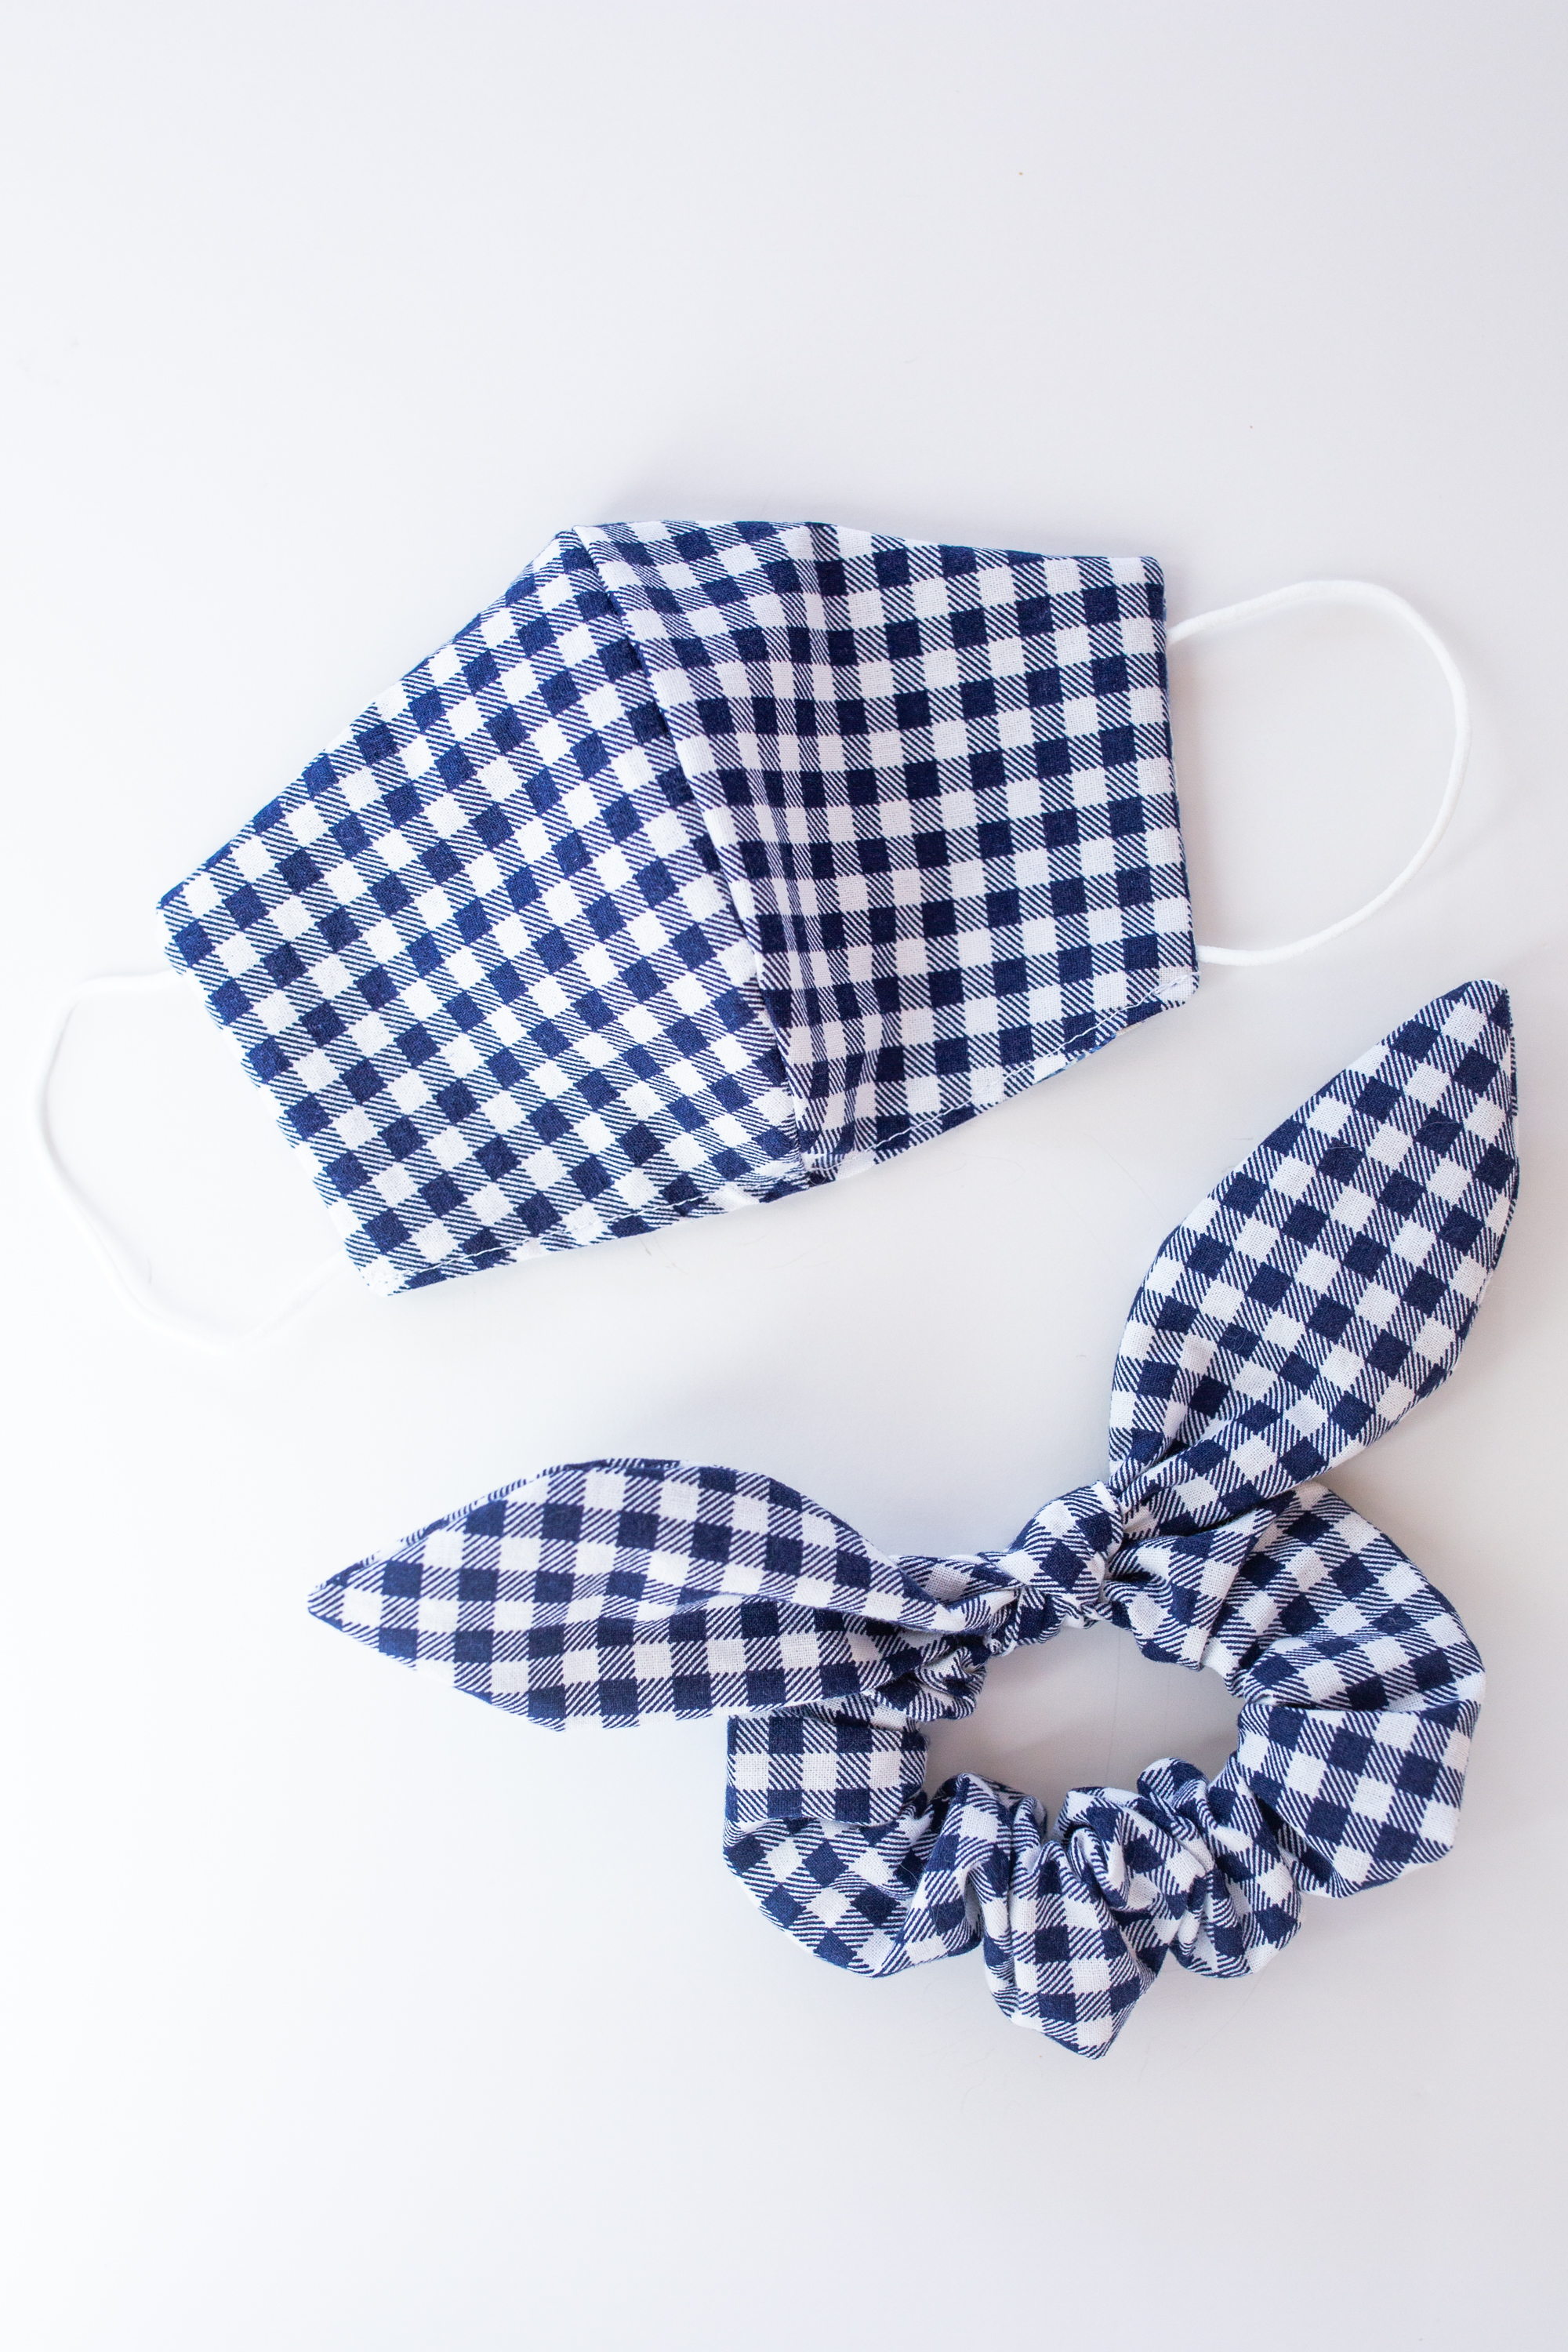 Matching Gingham Scrunchie and Face Mask Set / Face Mask for Fall / Preppy Style / Preppy Outfit / Gingham Print / Bow Scrunchie - Sunshine Style